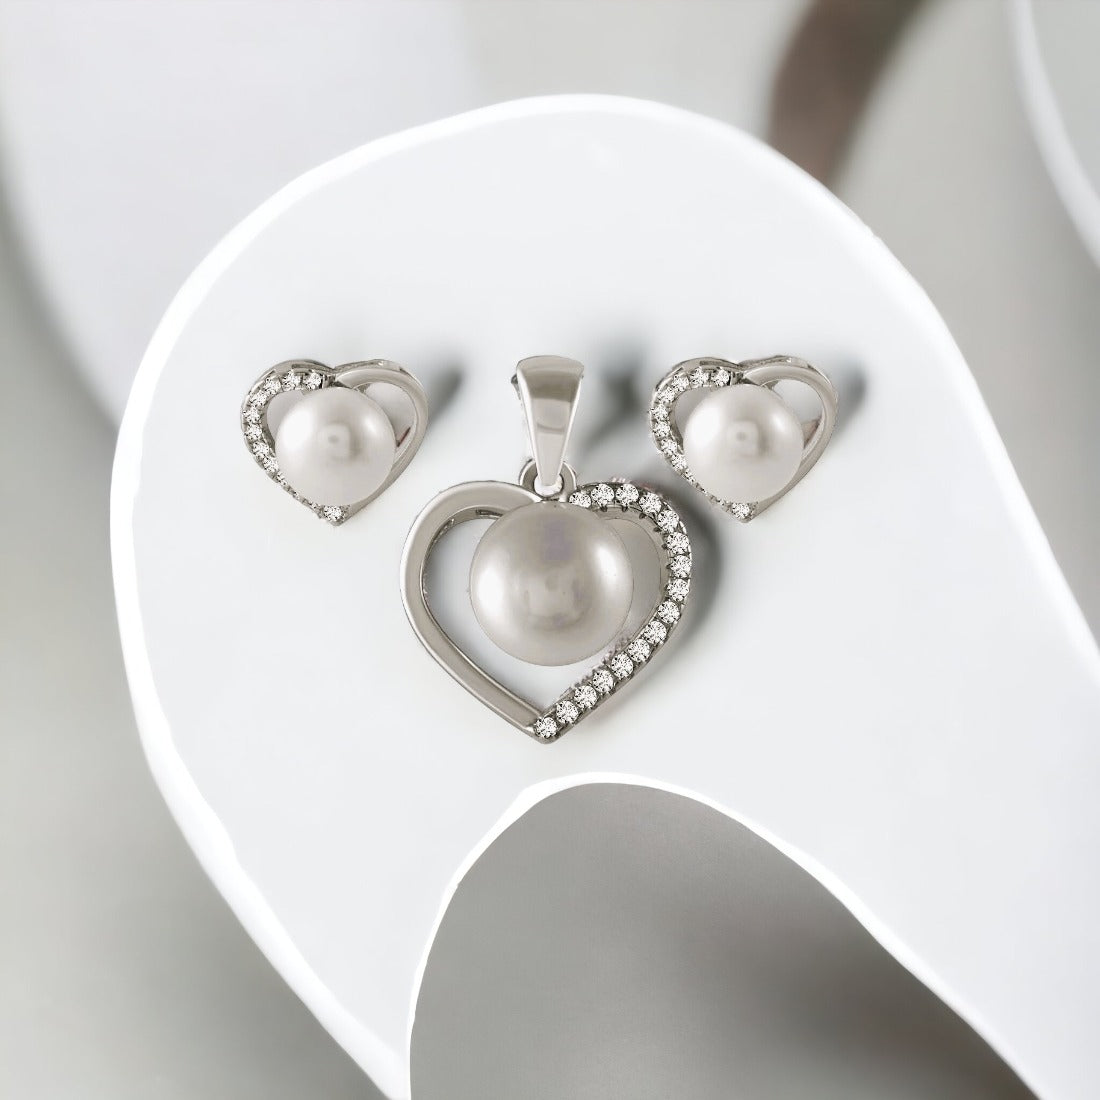 Heart Shaped Silver Earring And Pendant Set For Women & Girls